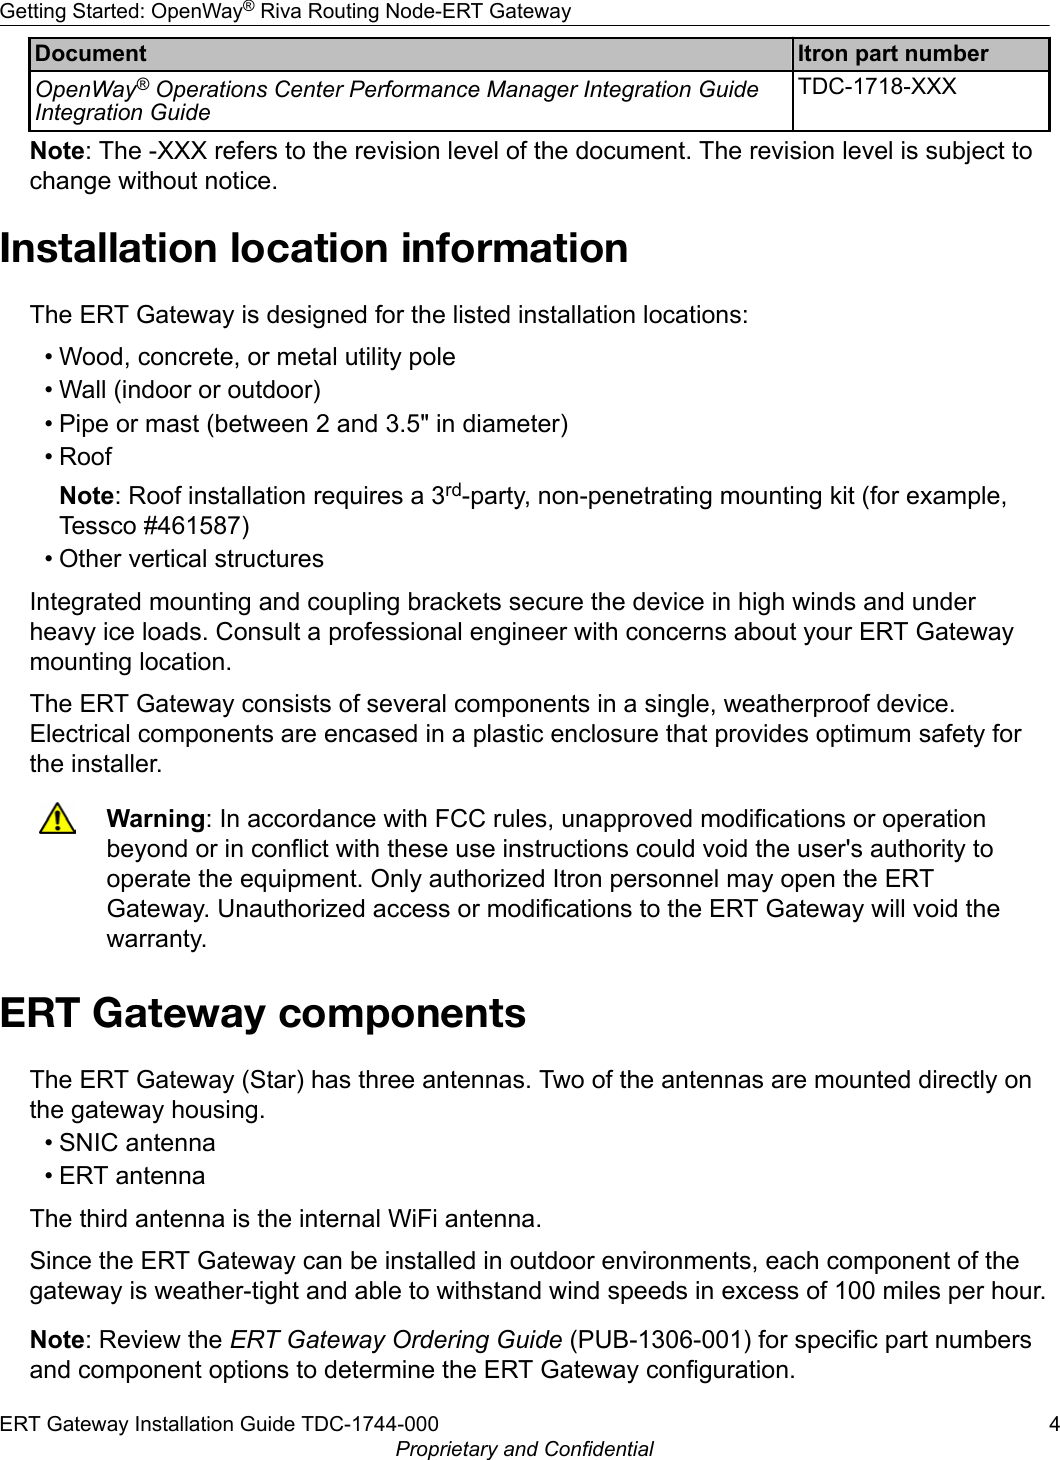 Document Itron part numberOpenWay® Operations Center Performance Manager Integration GuideIntegration GuideTDC-1718-XXXNote: The -XXX refers to the revision level of the document. The revision level is subject tochange without notice.Installation location informationThe ERT Gateway is designed for the listed installation locations:• Wood, concrete, or metal utility pole• Wall (indoor or outdoor)• Pipe or mast (between 2 and 3.5&quot; in diameter)• RoofNote: Roof installation requires a 3rd-party, non-penetrating mounting kit (for example,Tessco #461587)• Other vertical structuresIntegrated mounting and coupling brackets secure the device in high winds and underheavy ice loads. Consult a professional engineer with concerns about your ERT Gatewaymounting location.The ERT Gateway consists of several components in a single, weatherproof device.Electrical components are encased in a plastic enclosure that provides optimum safety forthe installer.Warning: In accordance with FCC rules, unapproved modifications or operationbeyond or in conflict with these use instructions could void the user&apos;s authority tooperate the equipment. Only authorized Itron personnel may open the ERTGateway. Unauthorized access or modifications to the ERT Gateway will void thewarranty.ERT Gateway componentsThe ERT Gateway (Star) has three antennas. Two of the antennas are mounted directly onthe gateway housing.• SNIC antenna• ERT antennaThe third antenna is the internal WiFi antenna.Since the ERT Gateway can be installed in outdoor environments, each component of thegateway is weather-tight and able to withstand wind speeds in excess of 100 miles per hour.Note: Review the ERT Gateway Ordering Guide (PUB-1306-001) for specific part numbersand component options to determine the ERT Gateway configuration.Getting Started: OpenWay® Riva Routing Node-ERT GatewayERT Gateway Installation Guide TDC-1744-000 4Proprietary and Confidential